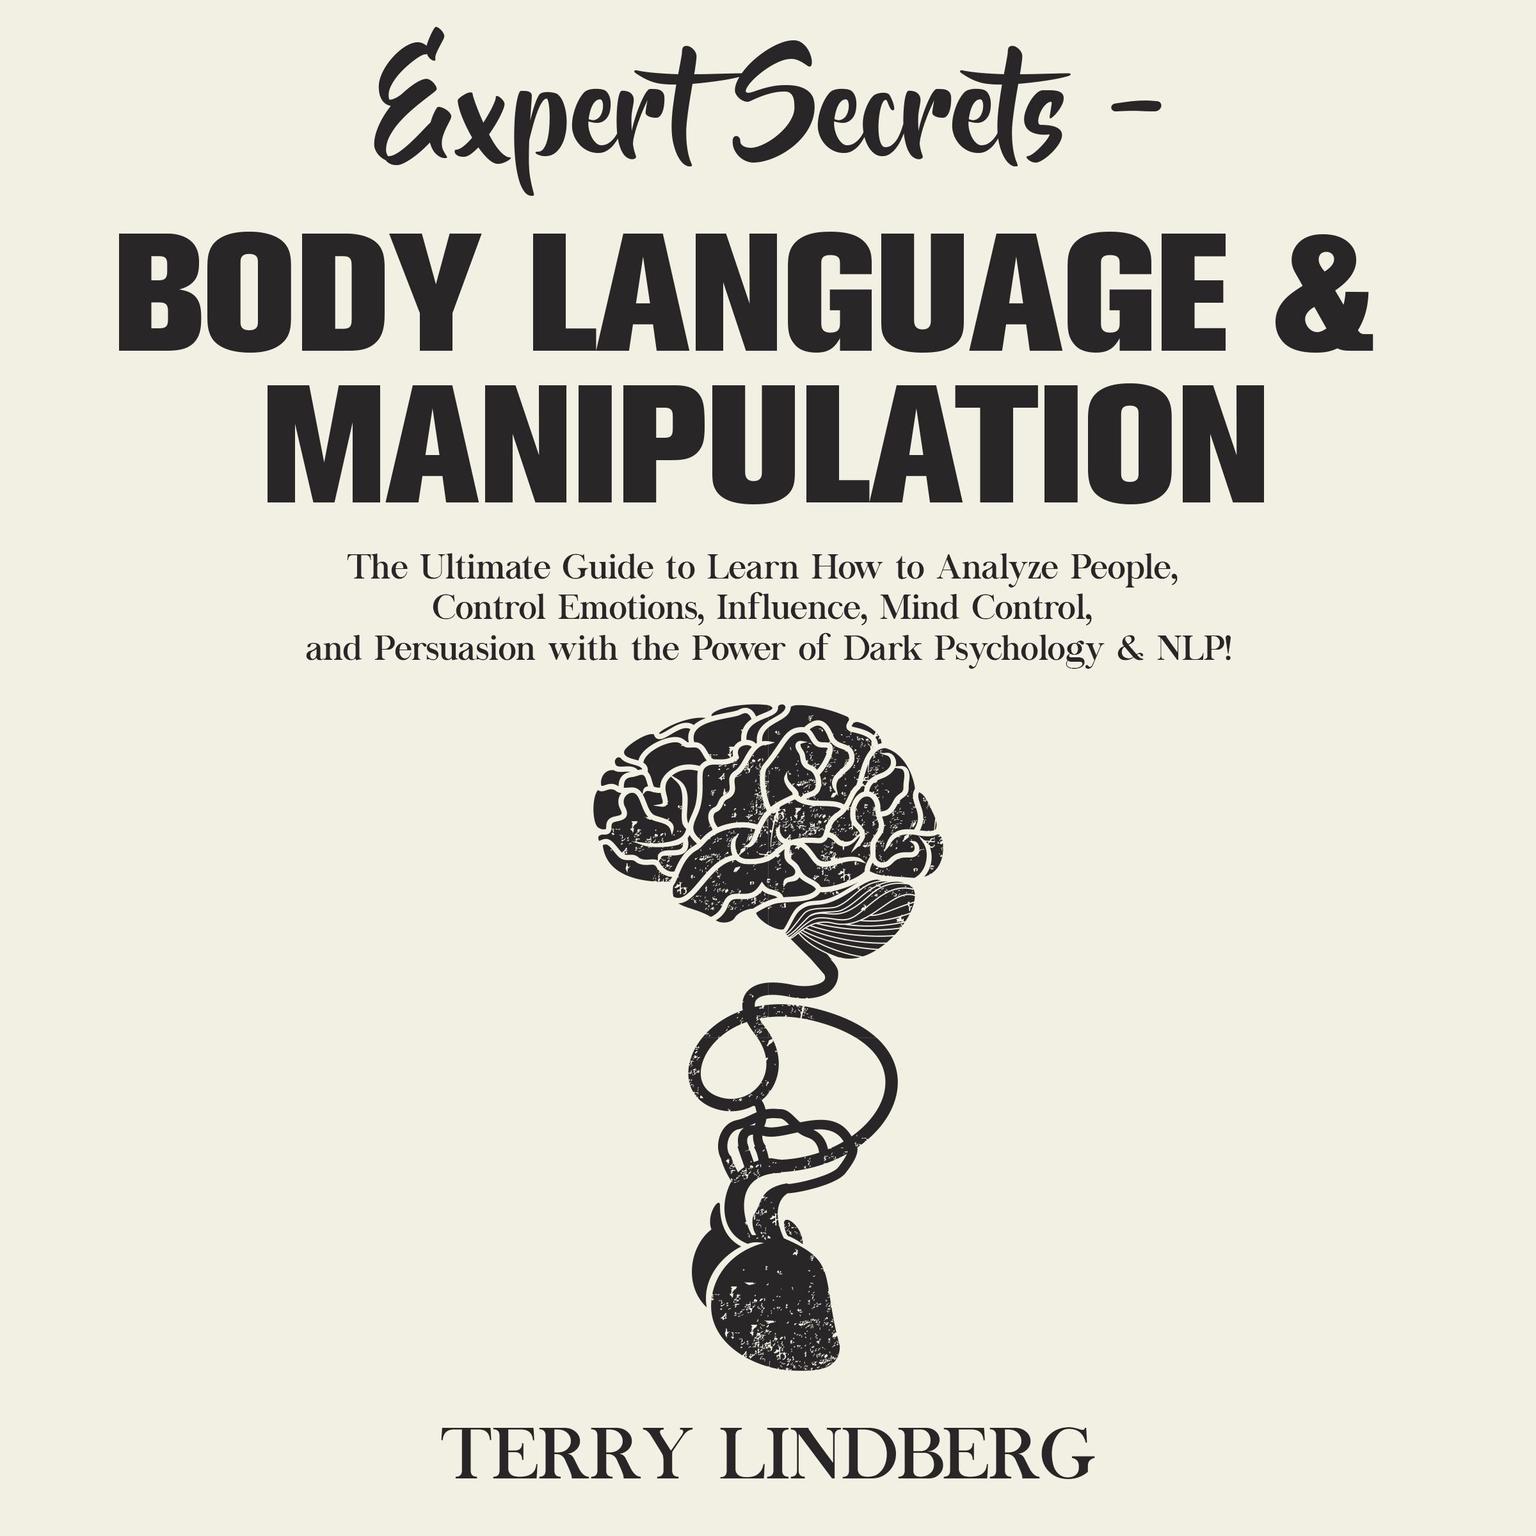 Expert Secrets – Body Language & Manipulation: The Ultimate Guide to Learn How to Analyze People, Control Emotions, Influence, Mind Control, and Persuasion with the Power of Dark Psychology & NLP! Audiobook, by Terry Lindberg